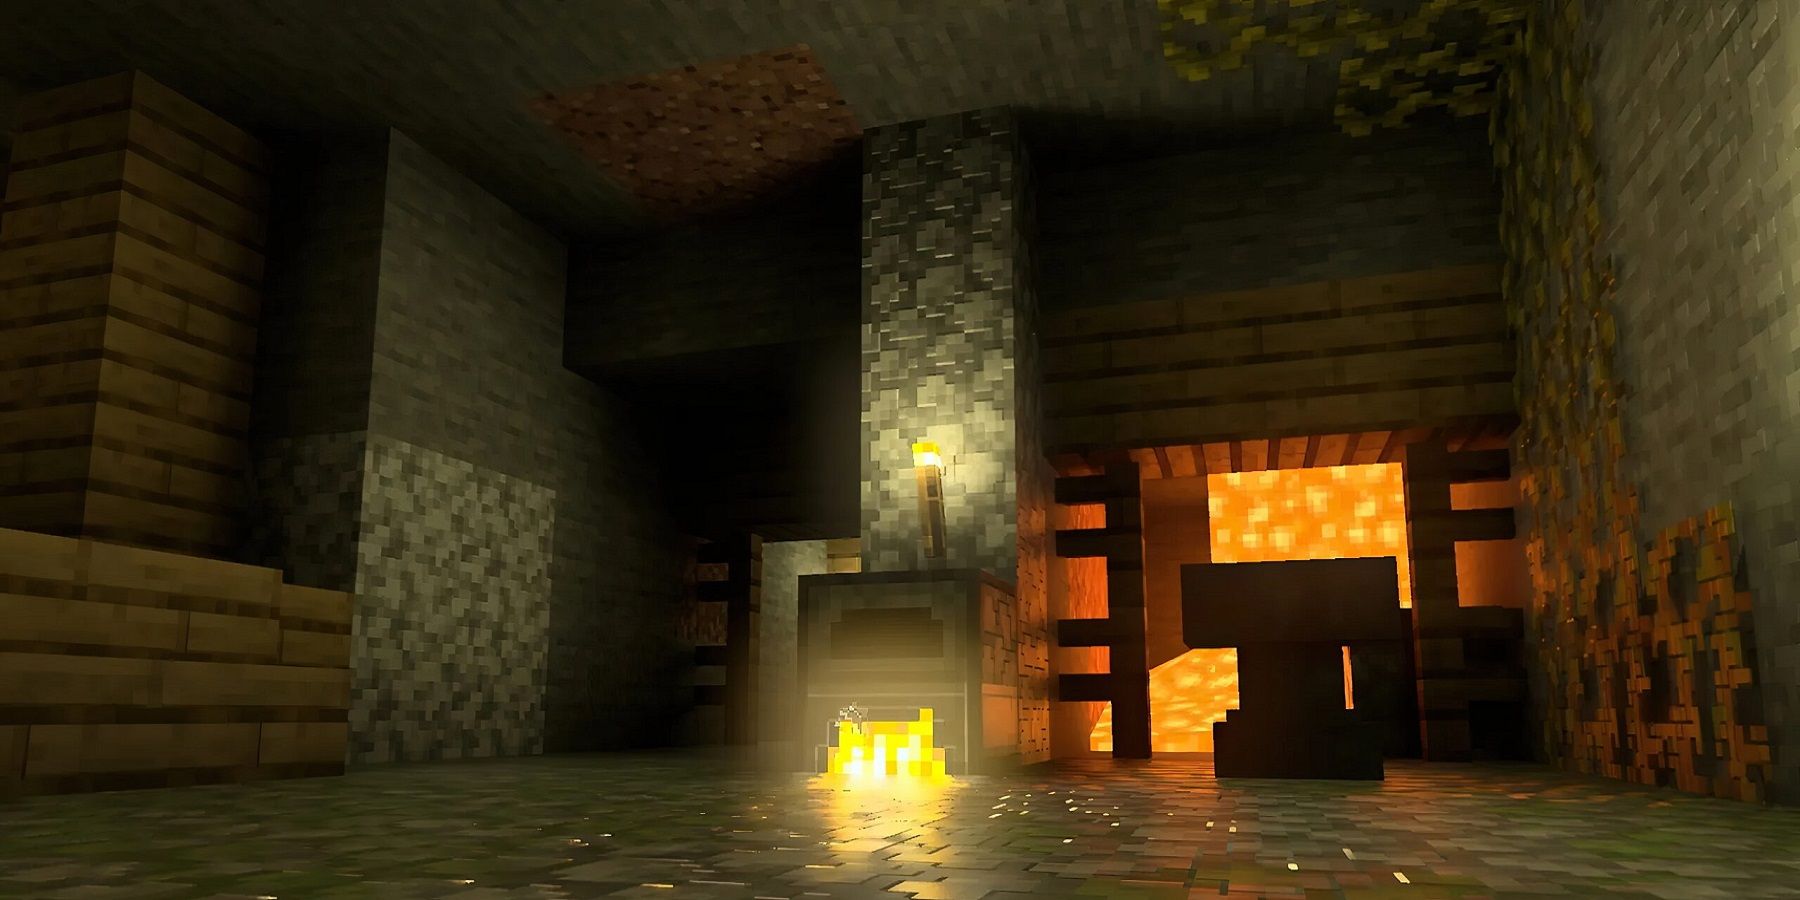 Java and Bedrock editions merge, creating one Minecraft to rule them all